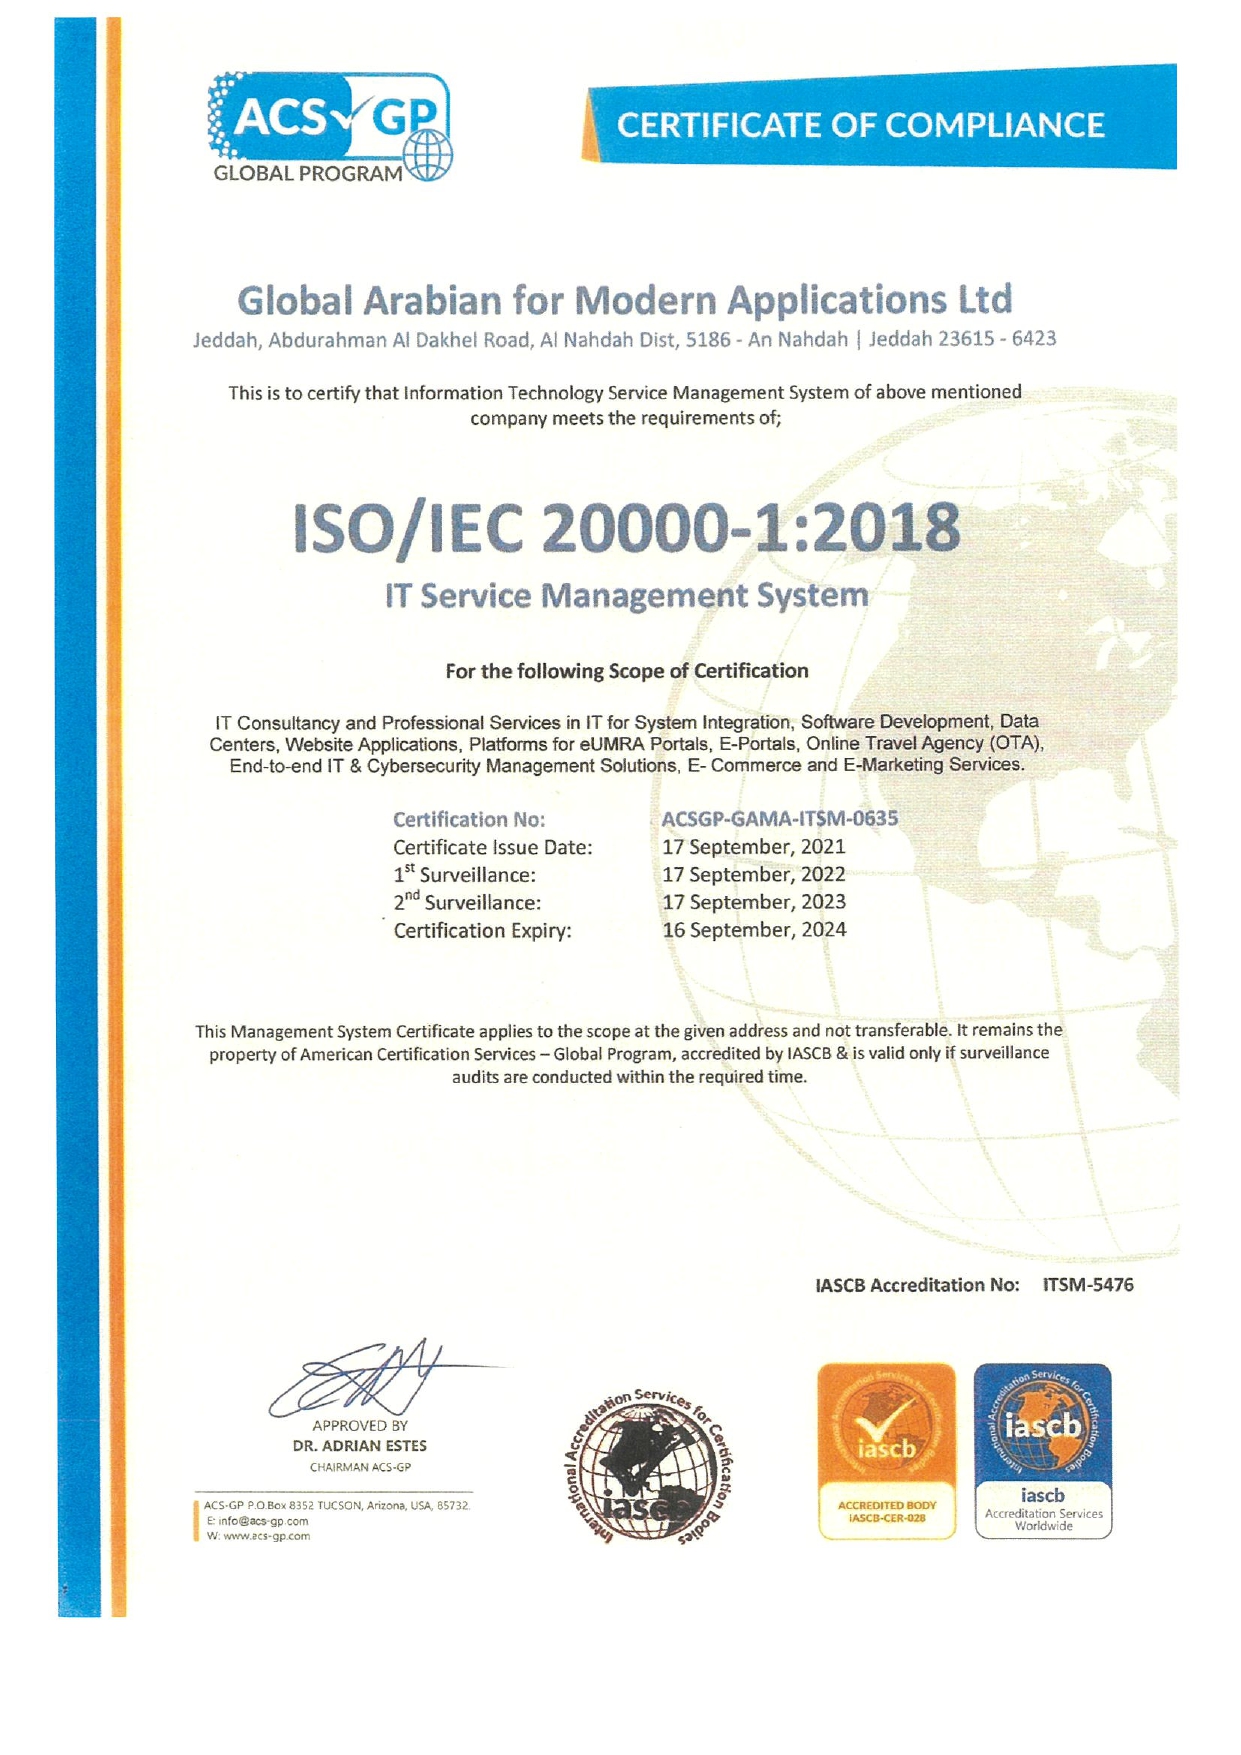 ISO 20000-1: 2011